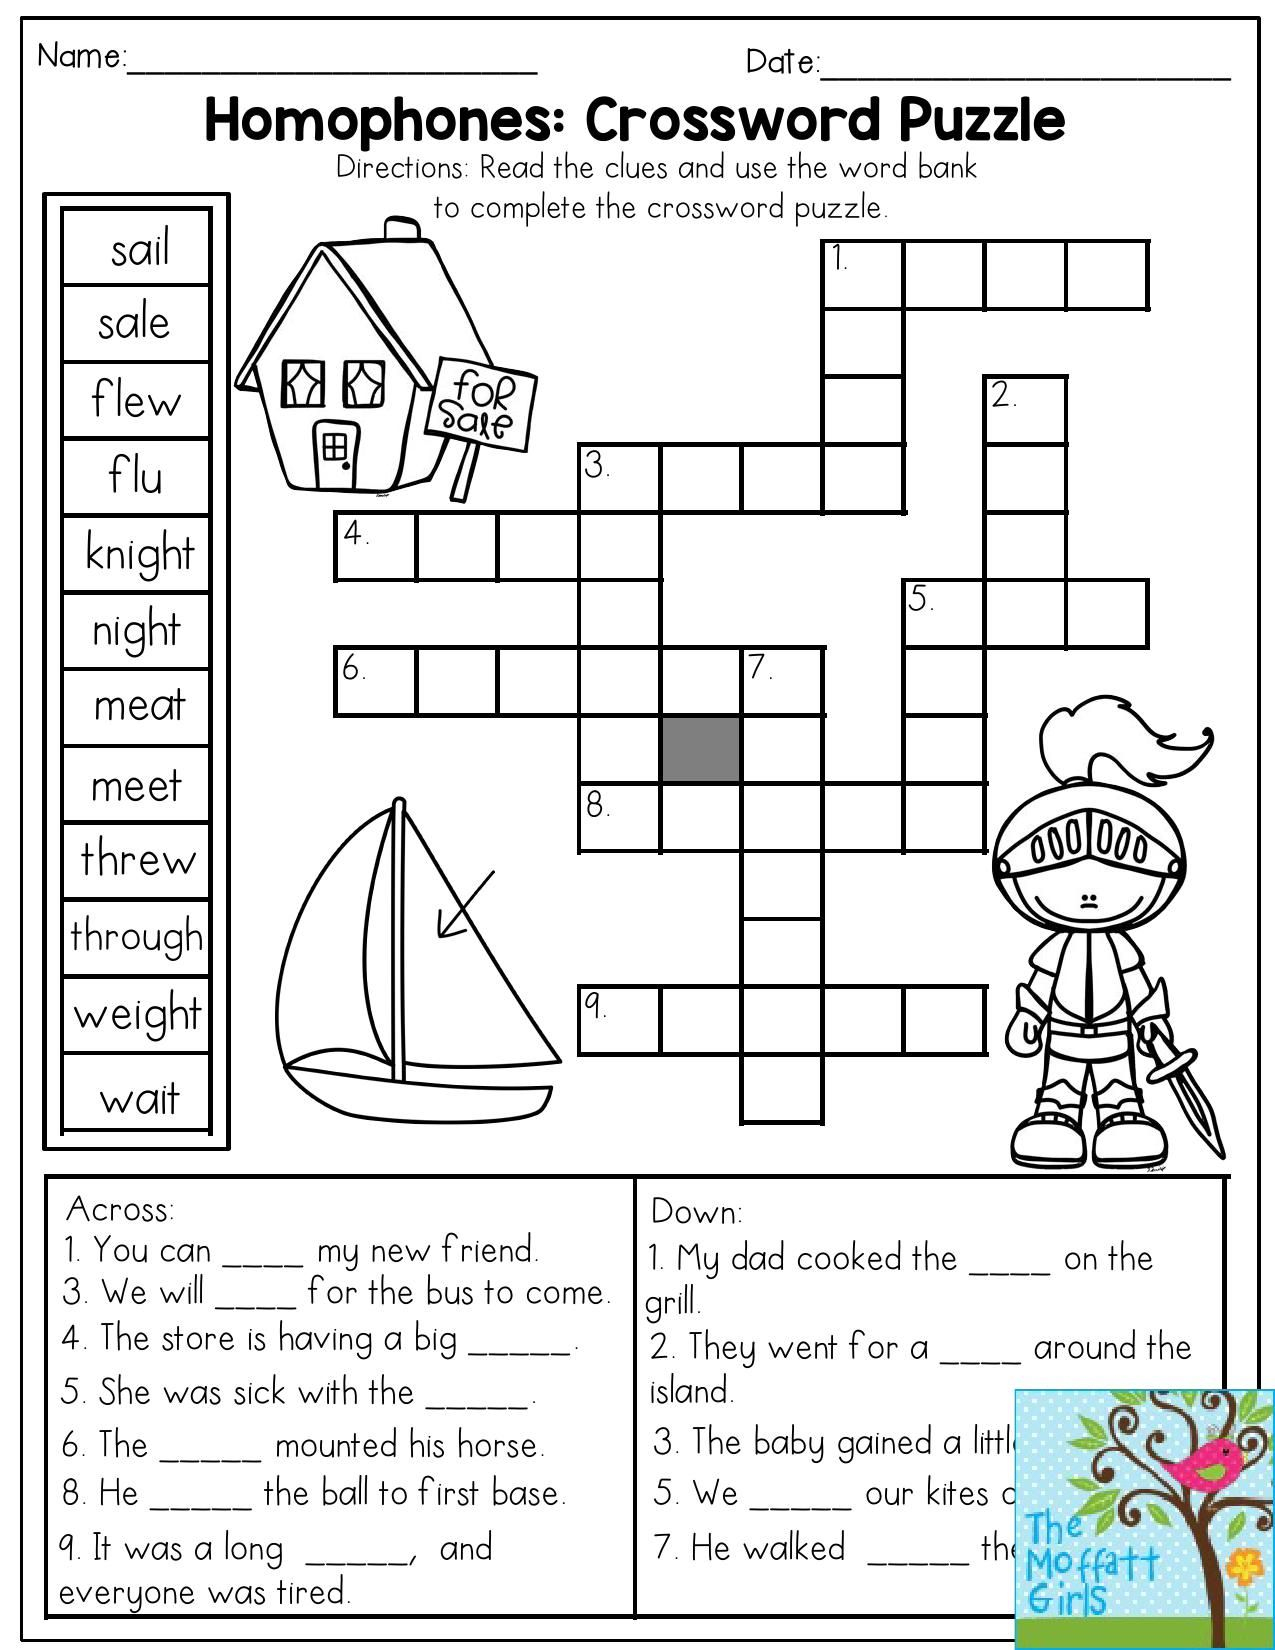 Math Puzzles 2Nd Grade Printable Crossword Puzzles For 2Nd Graders Printable Crossword Puzzles